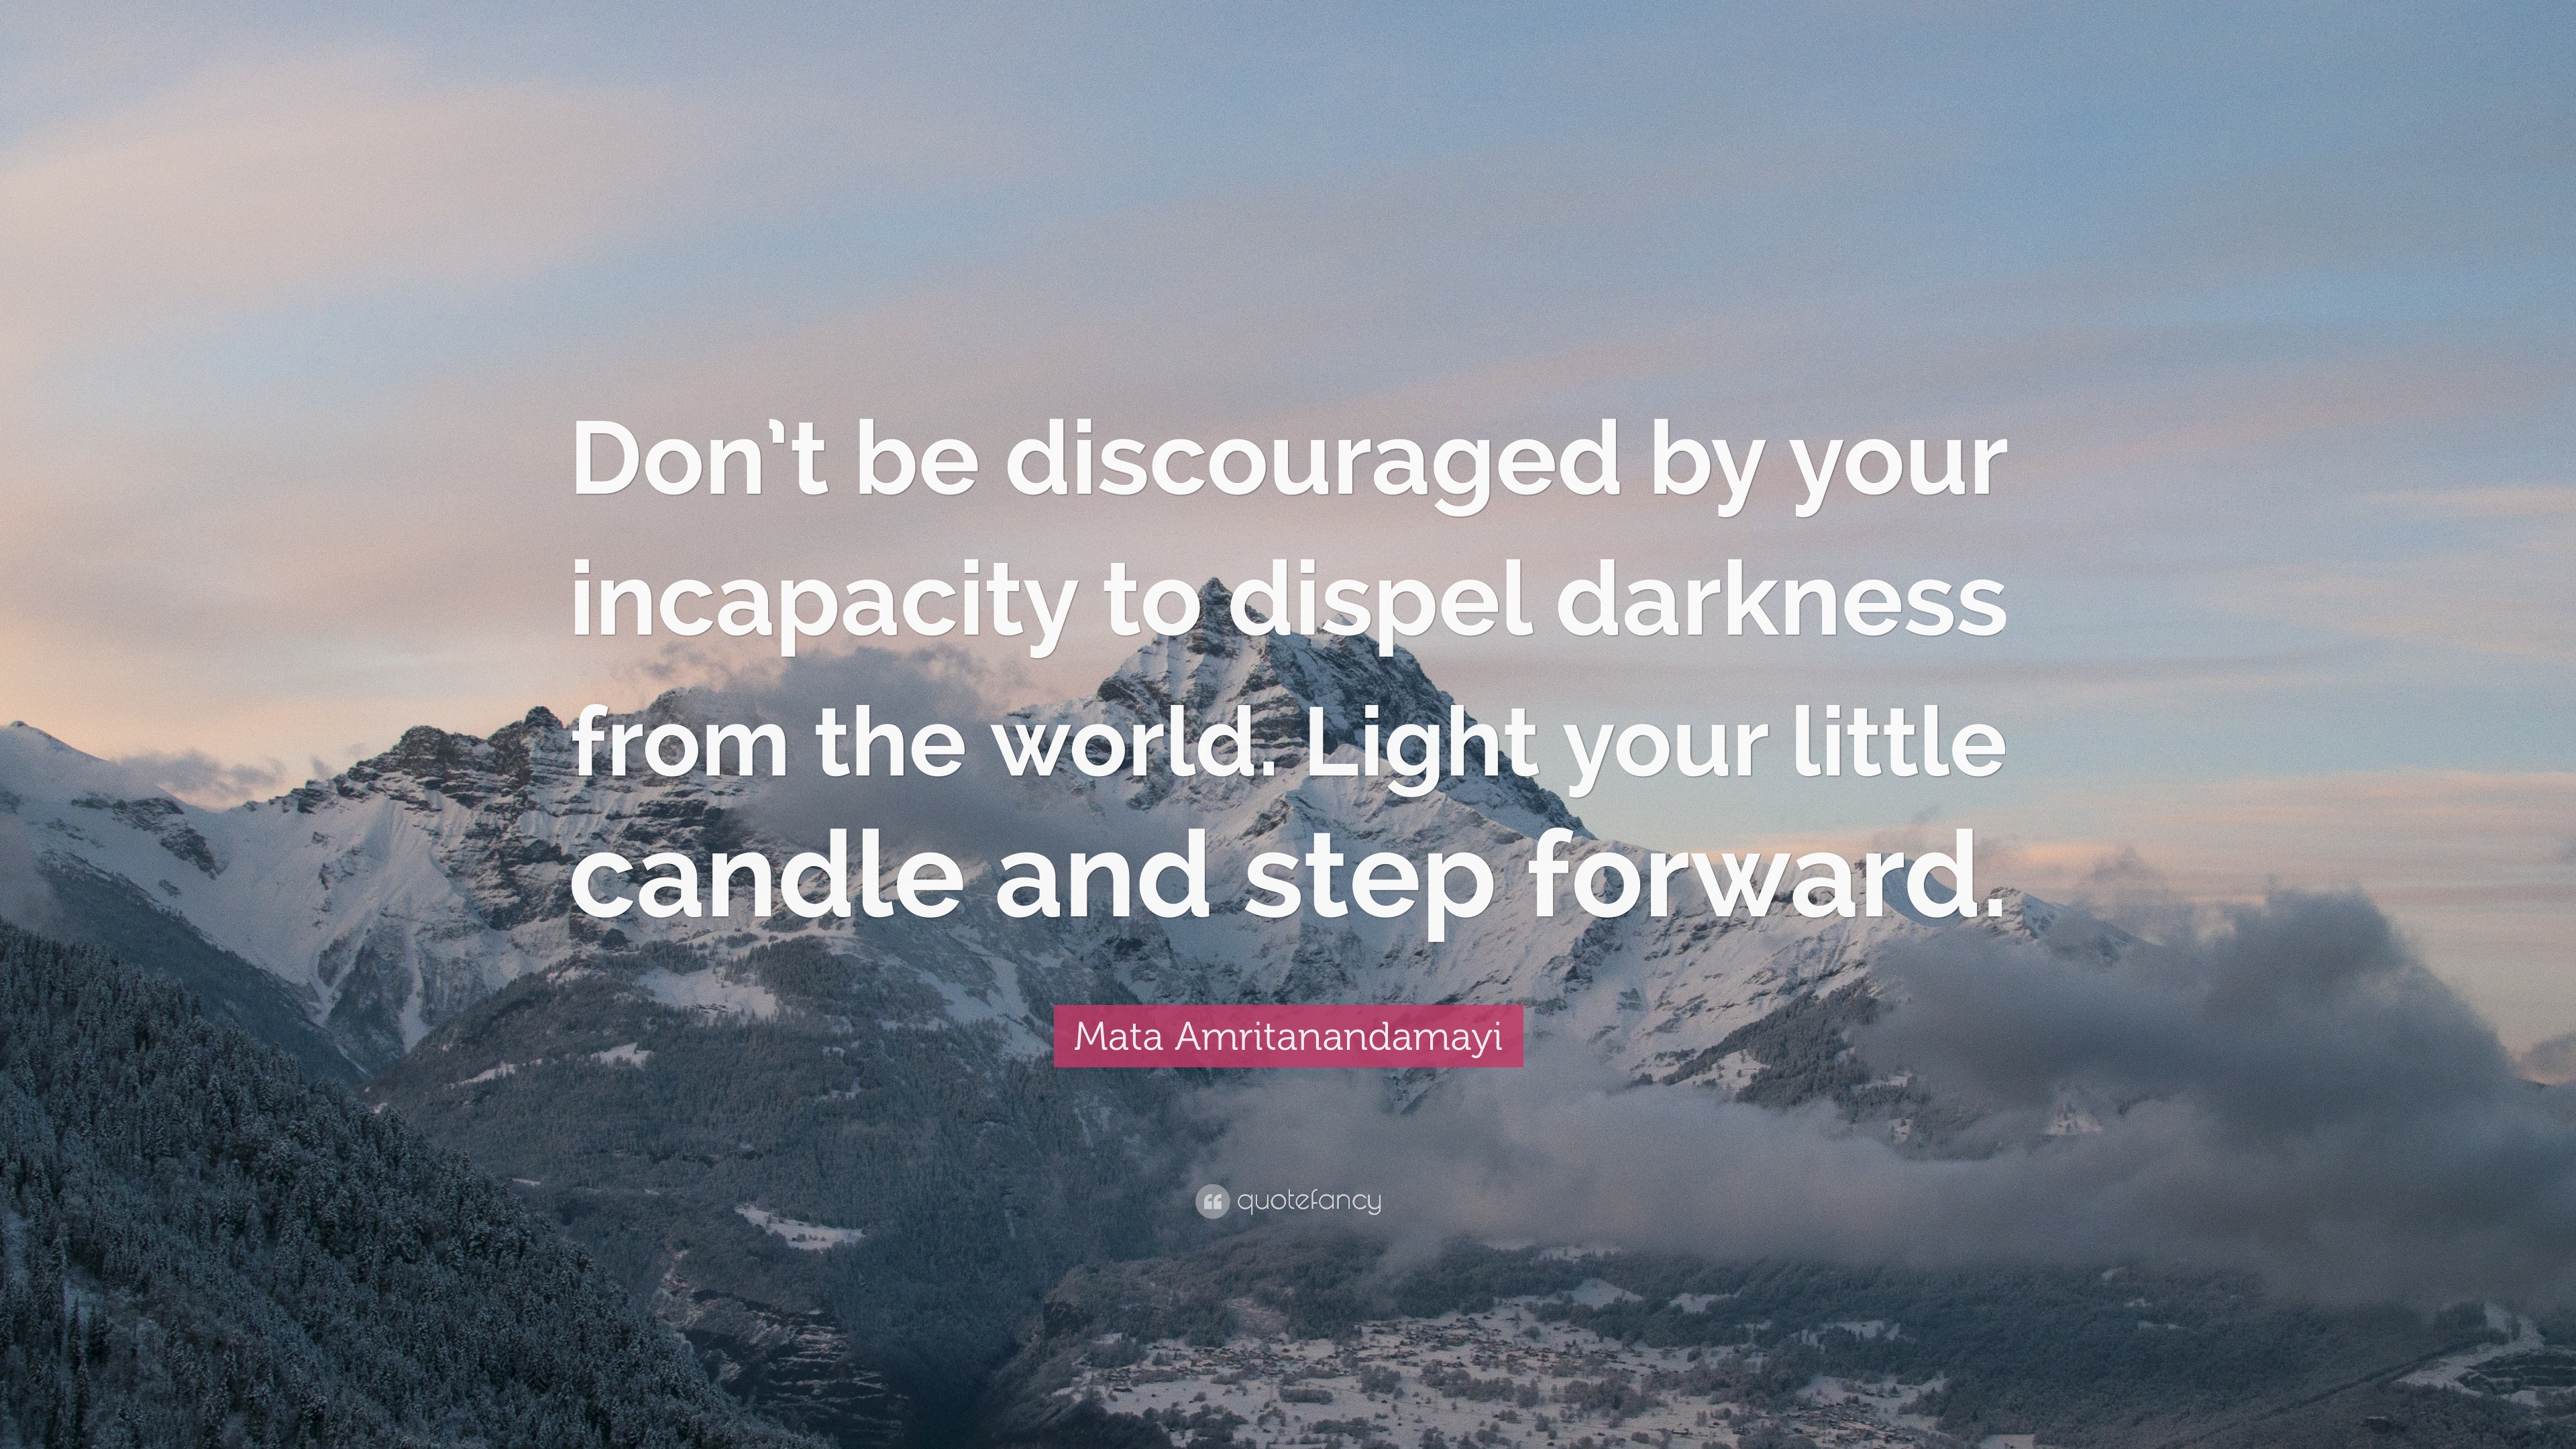 Mata Amritanandamayi Quote: “Don’t be discouraged by your incapacity to